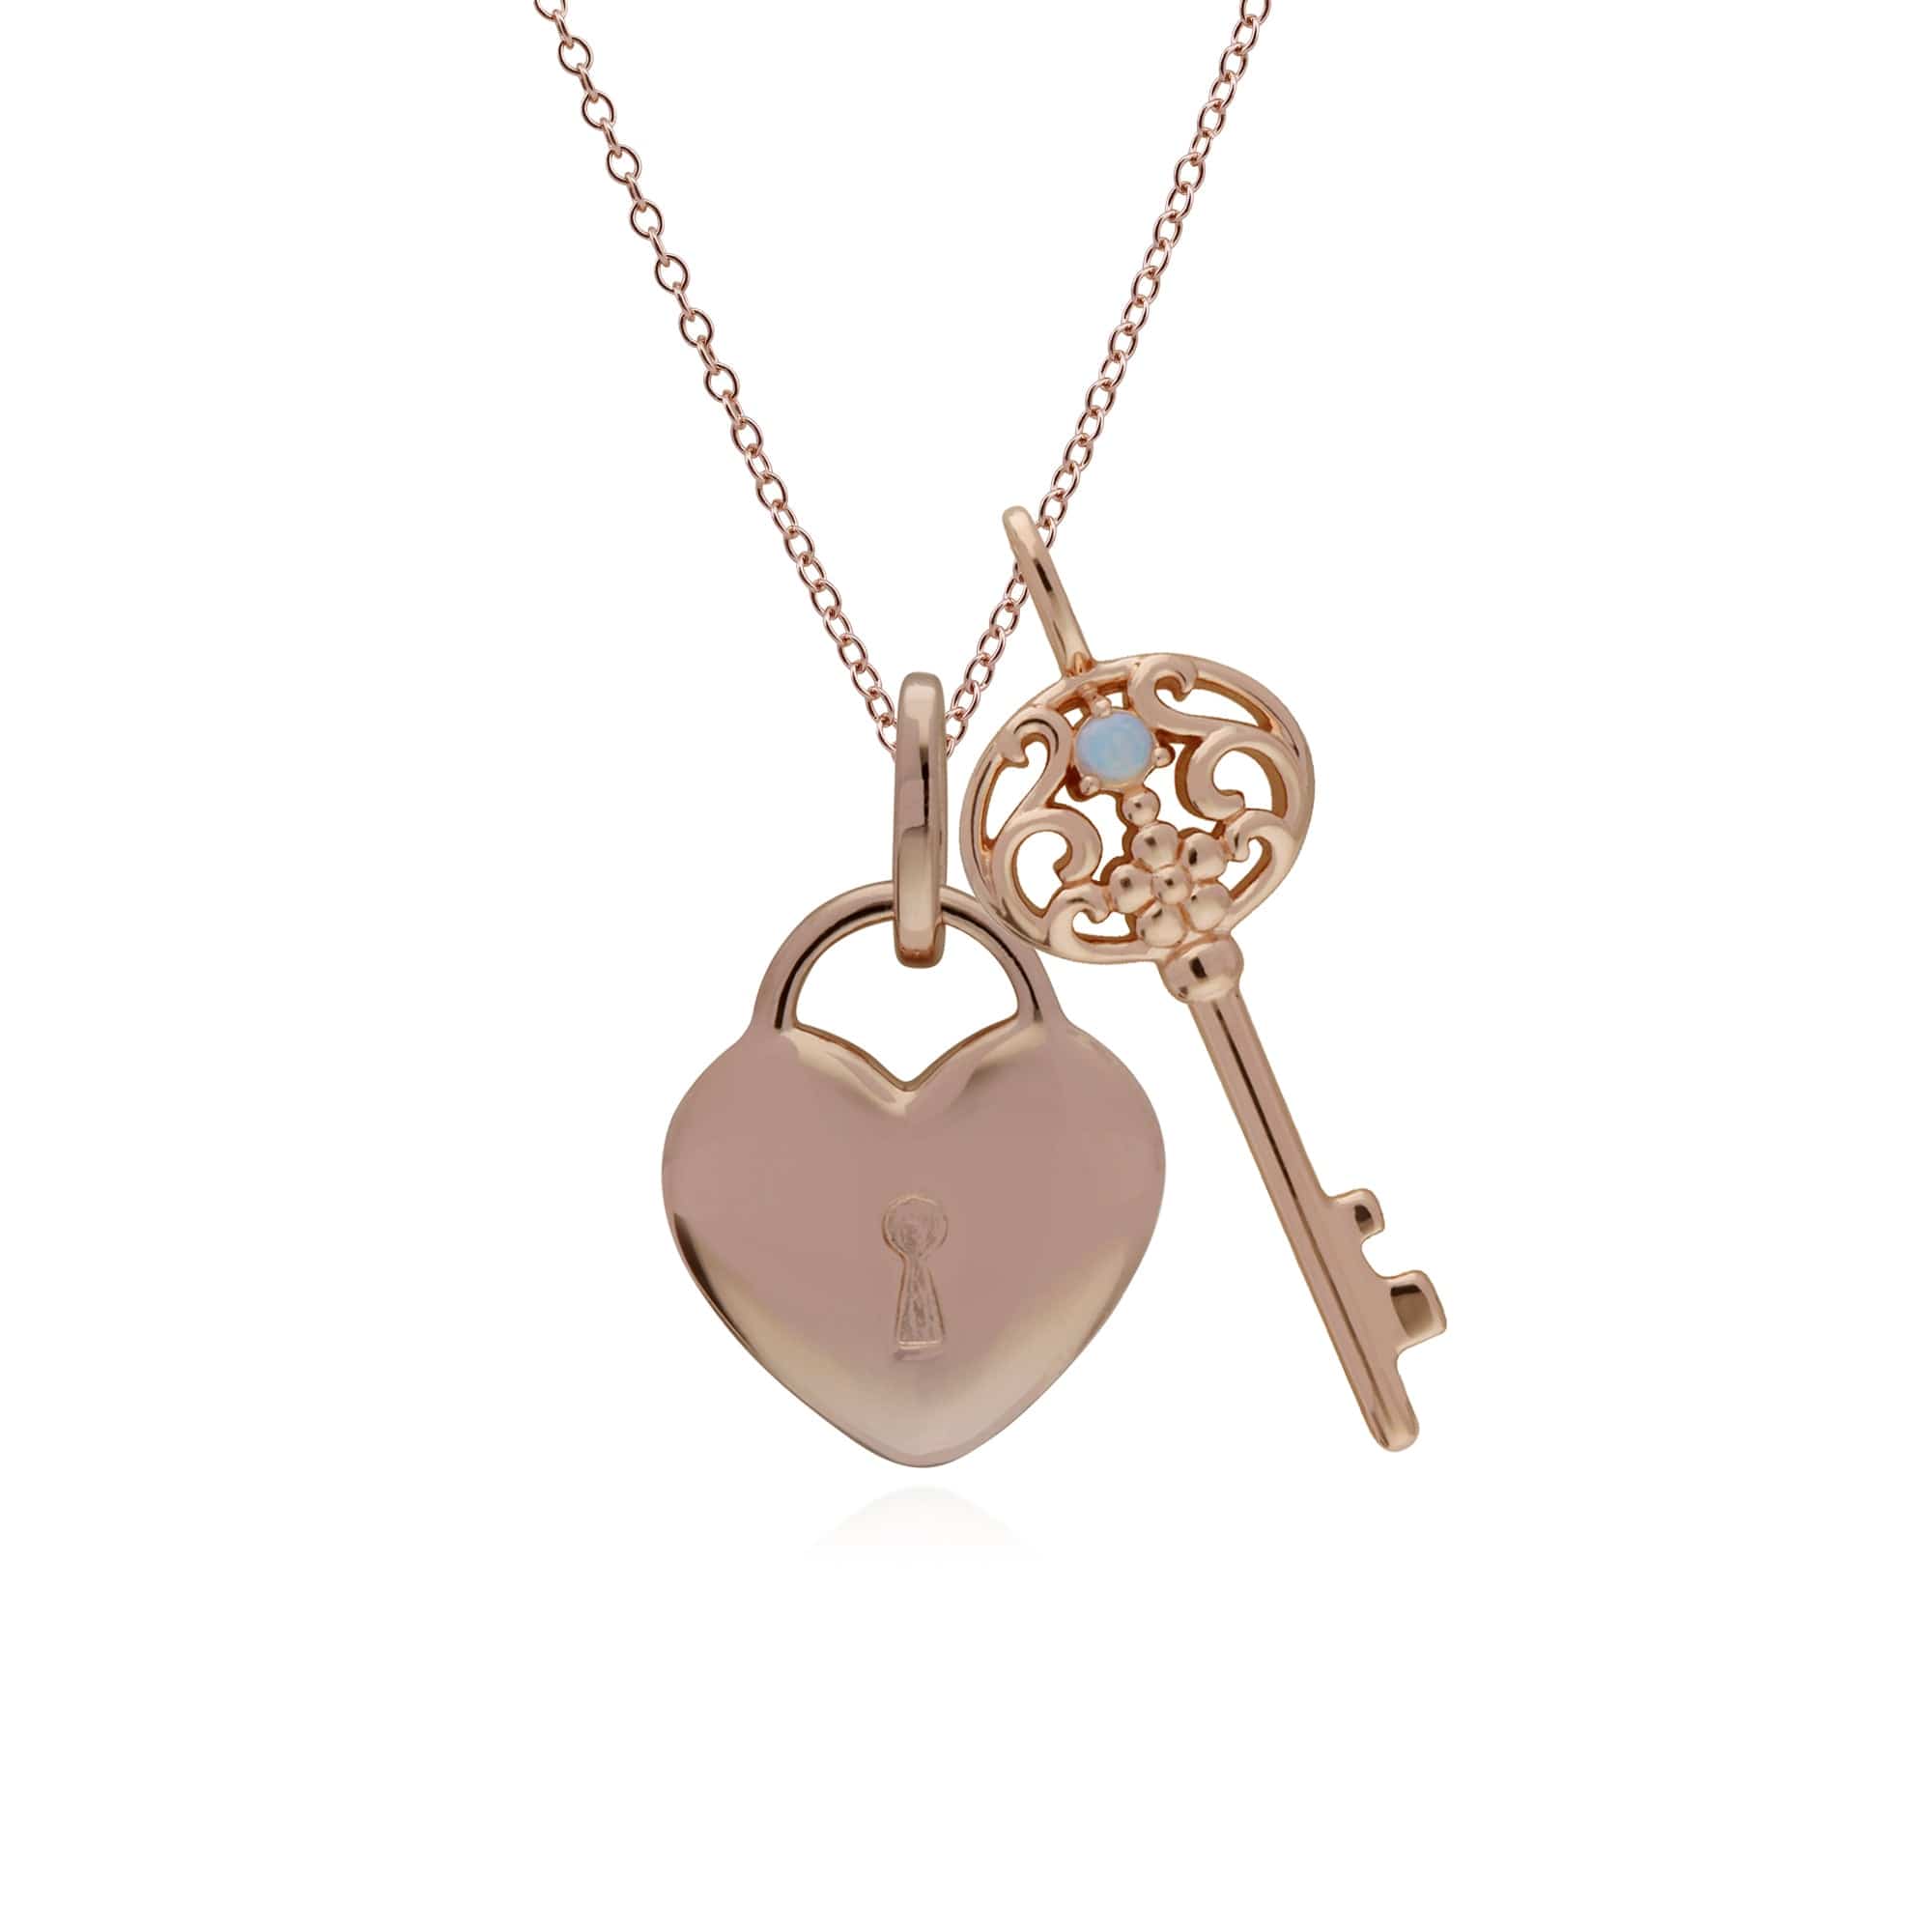 270P026702925-270P026901925 Classic Heart Lock Pendant & Opal Big Key Charm in Rose Gold Plated 925 Sterling Silver 1